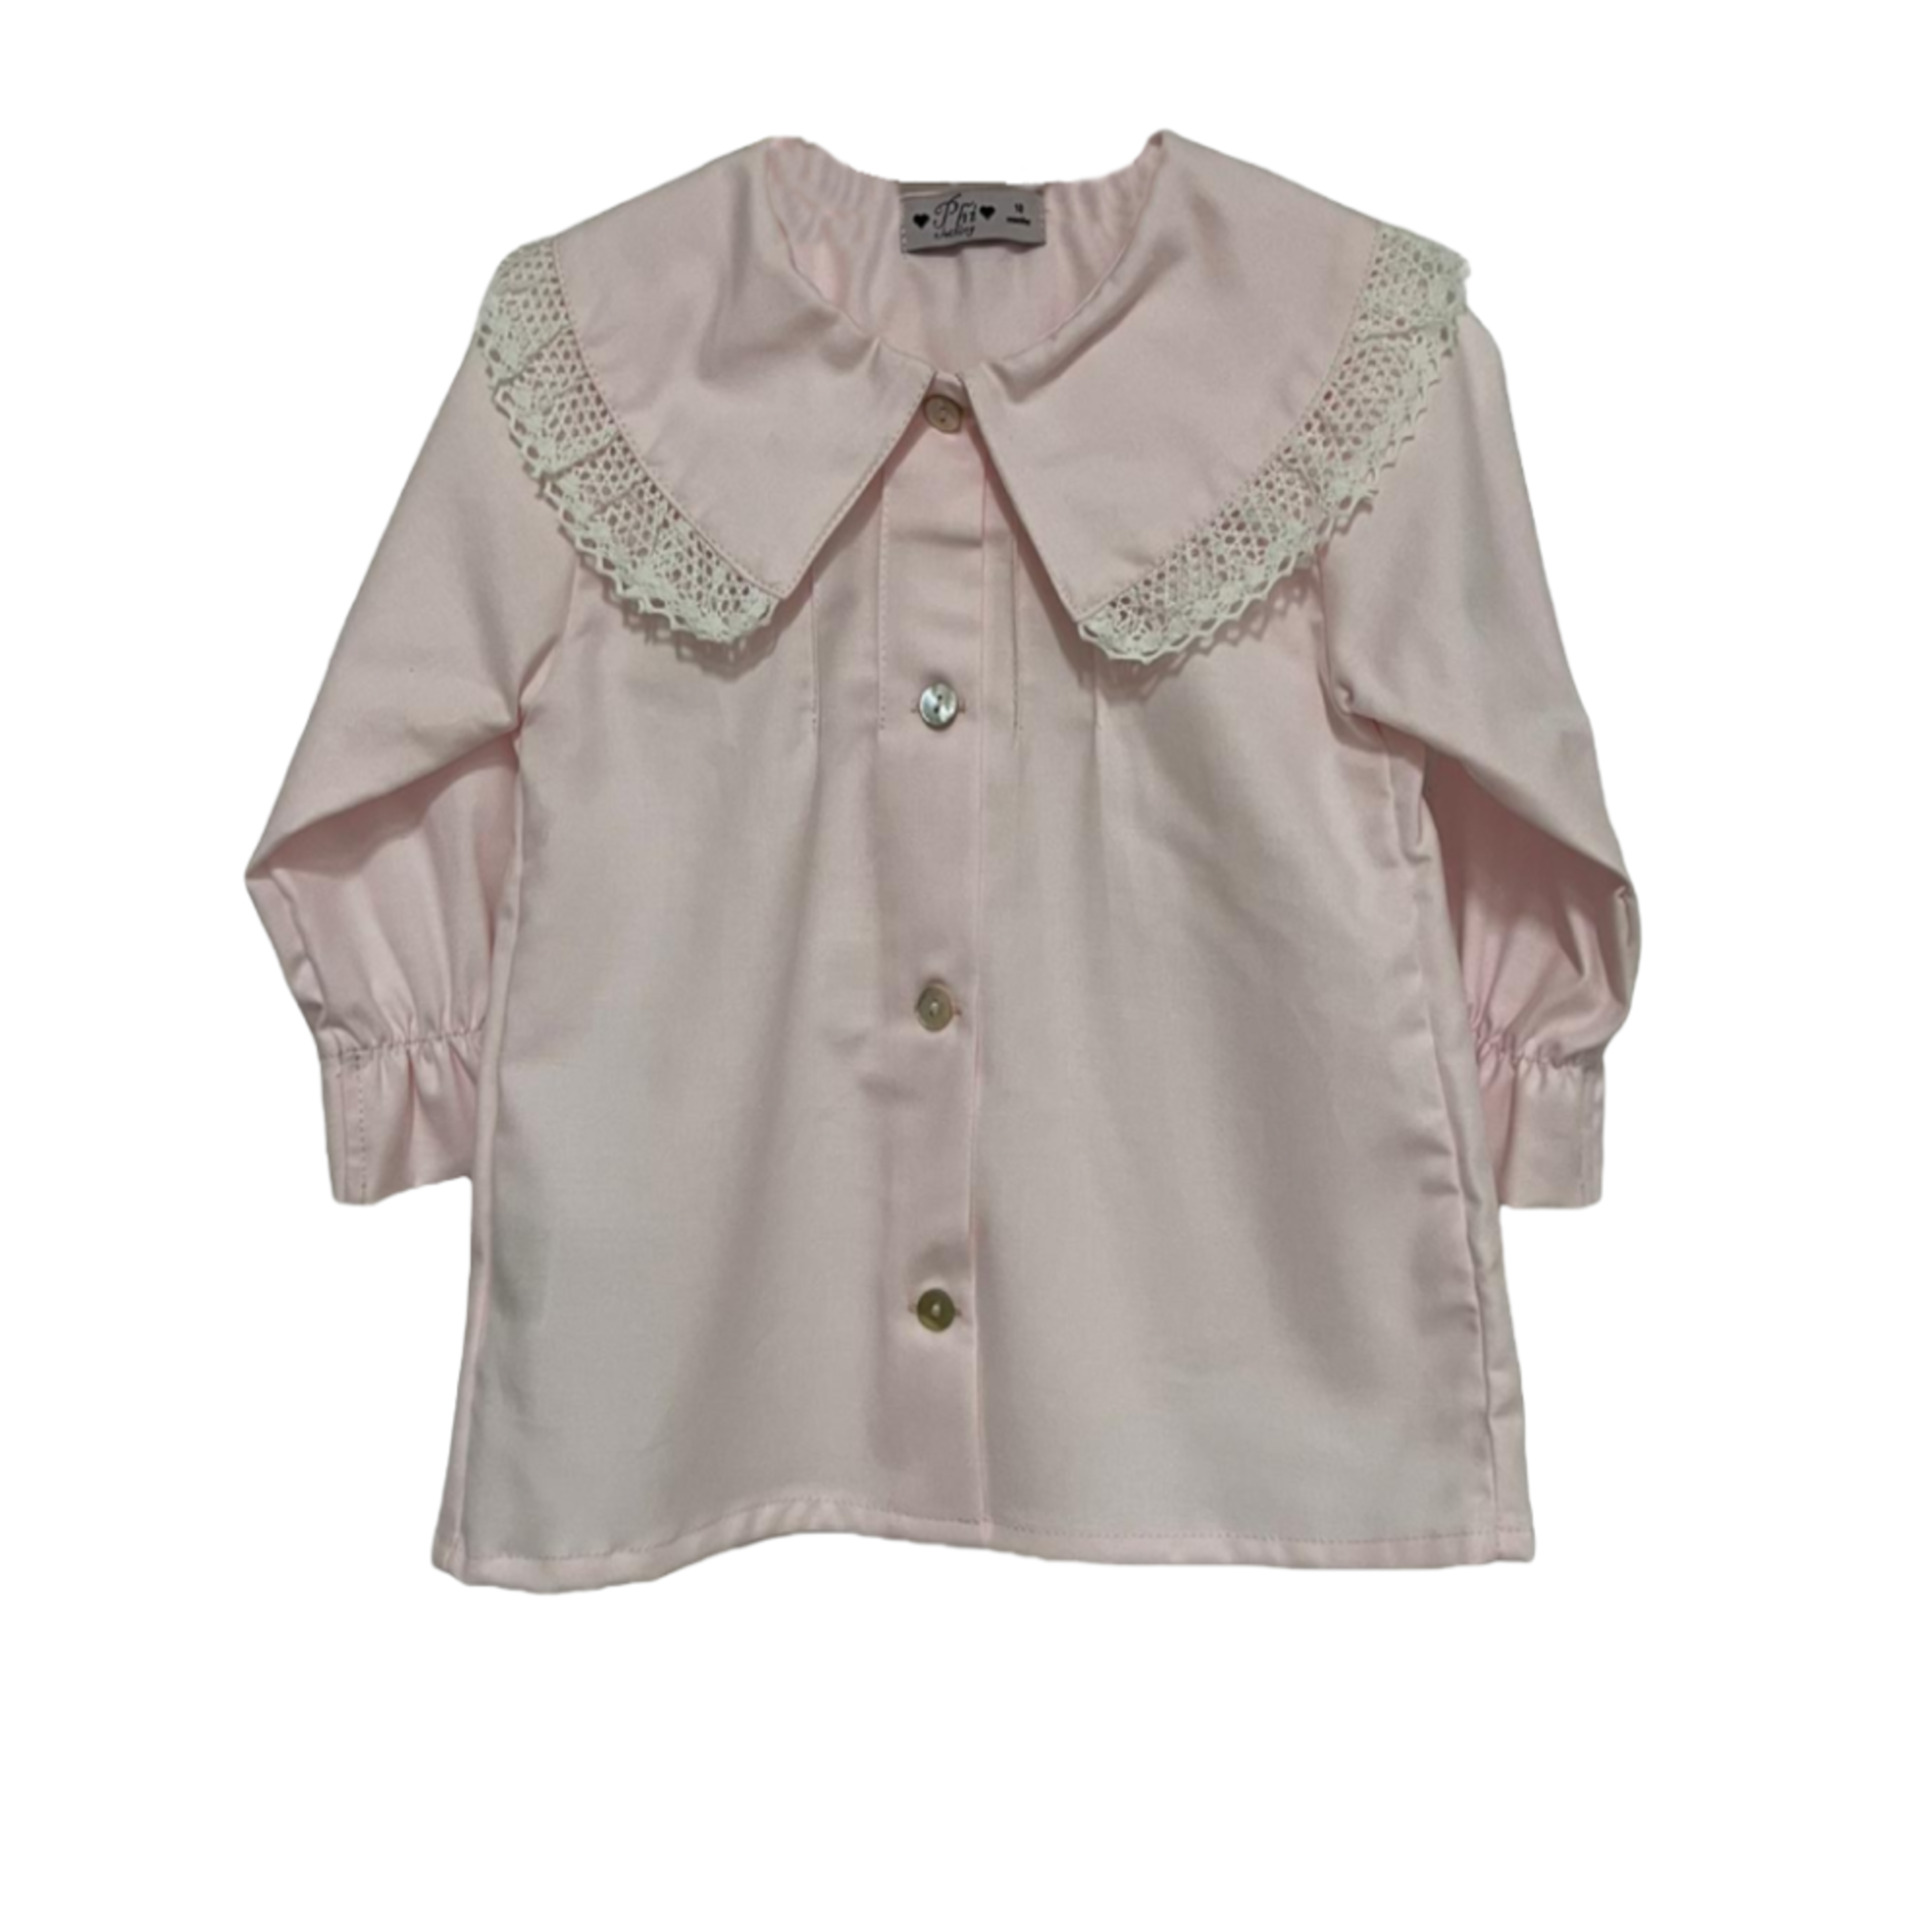 Pink blouse with lace